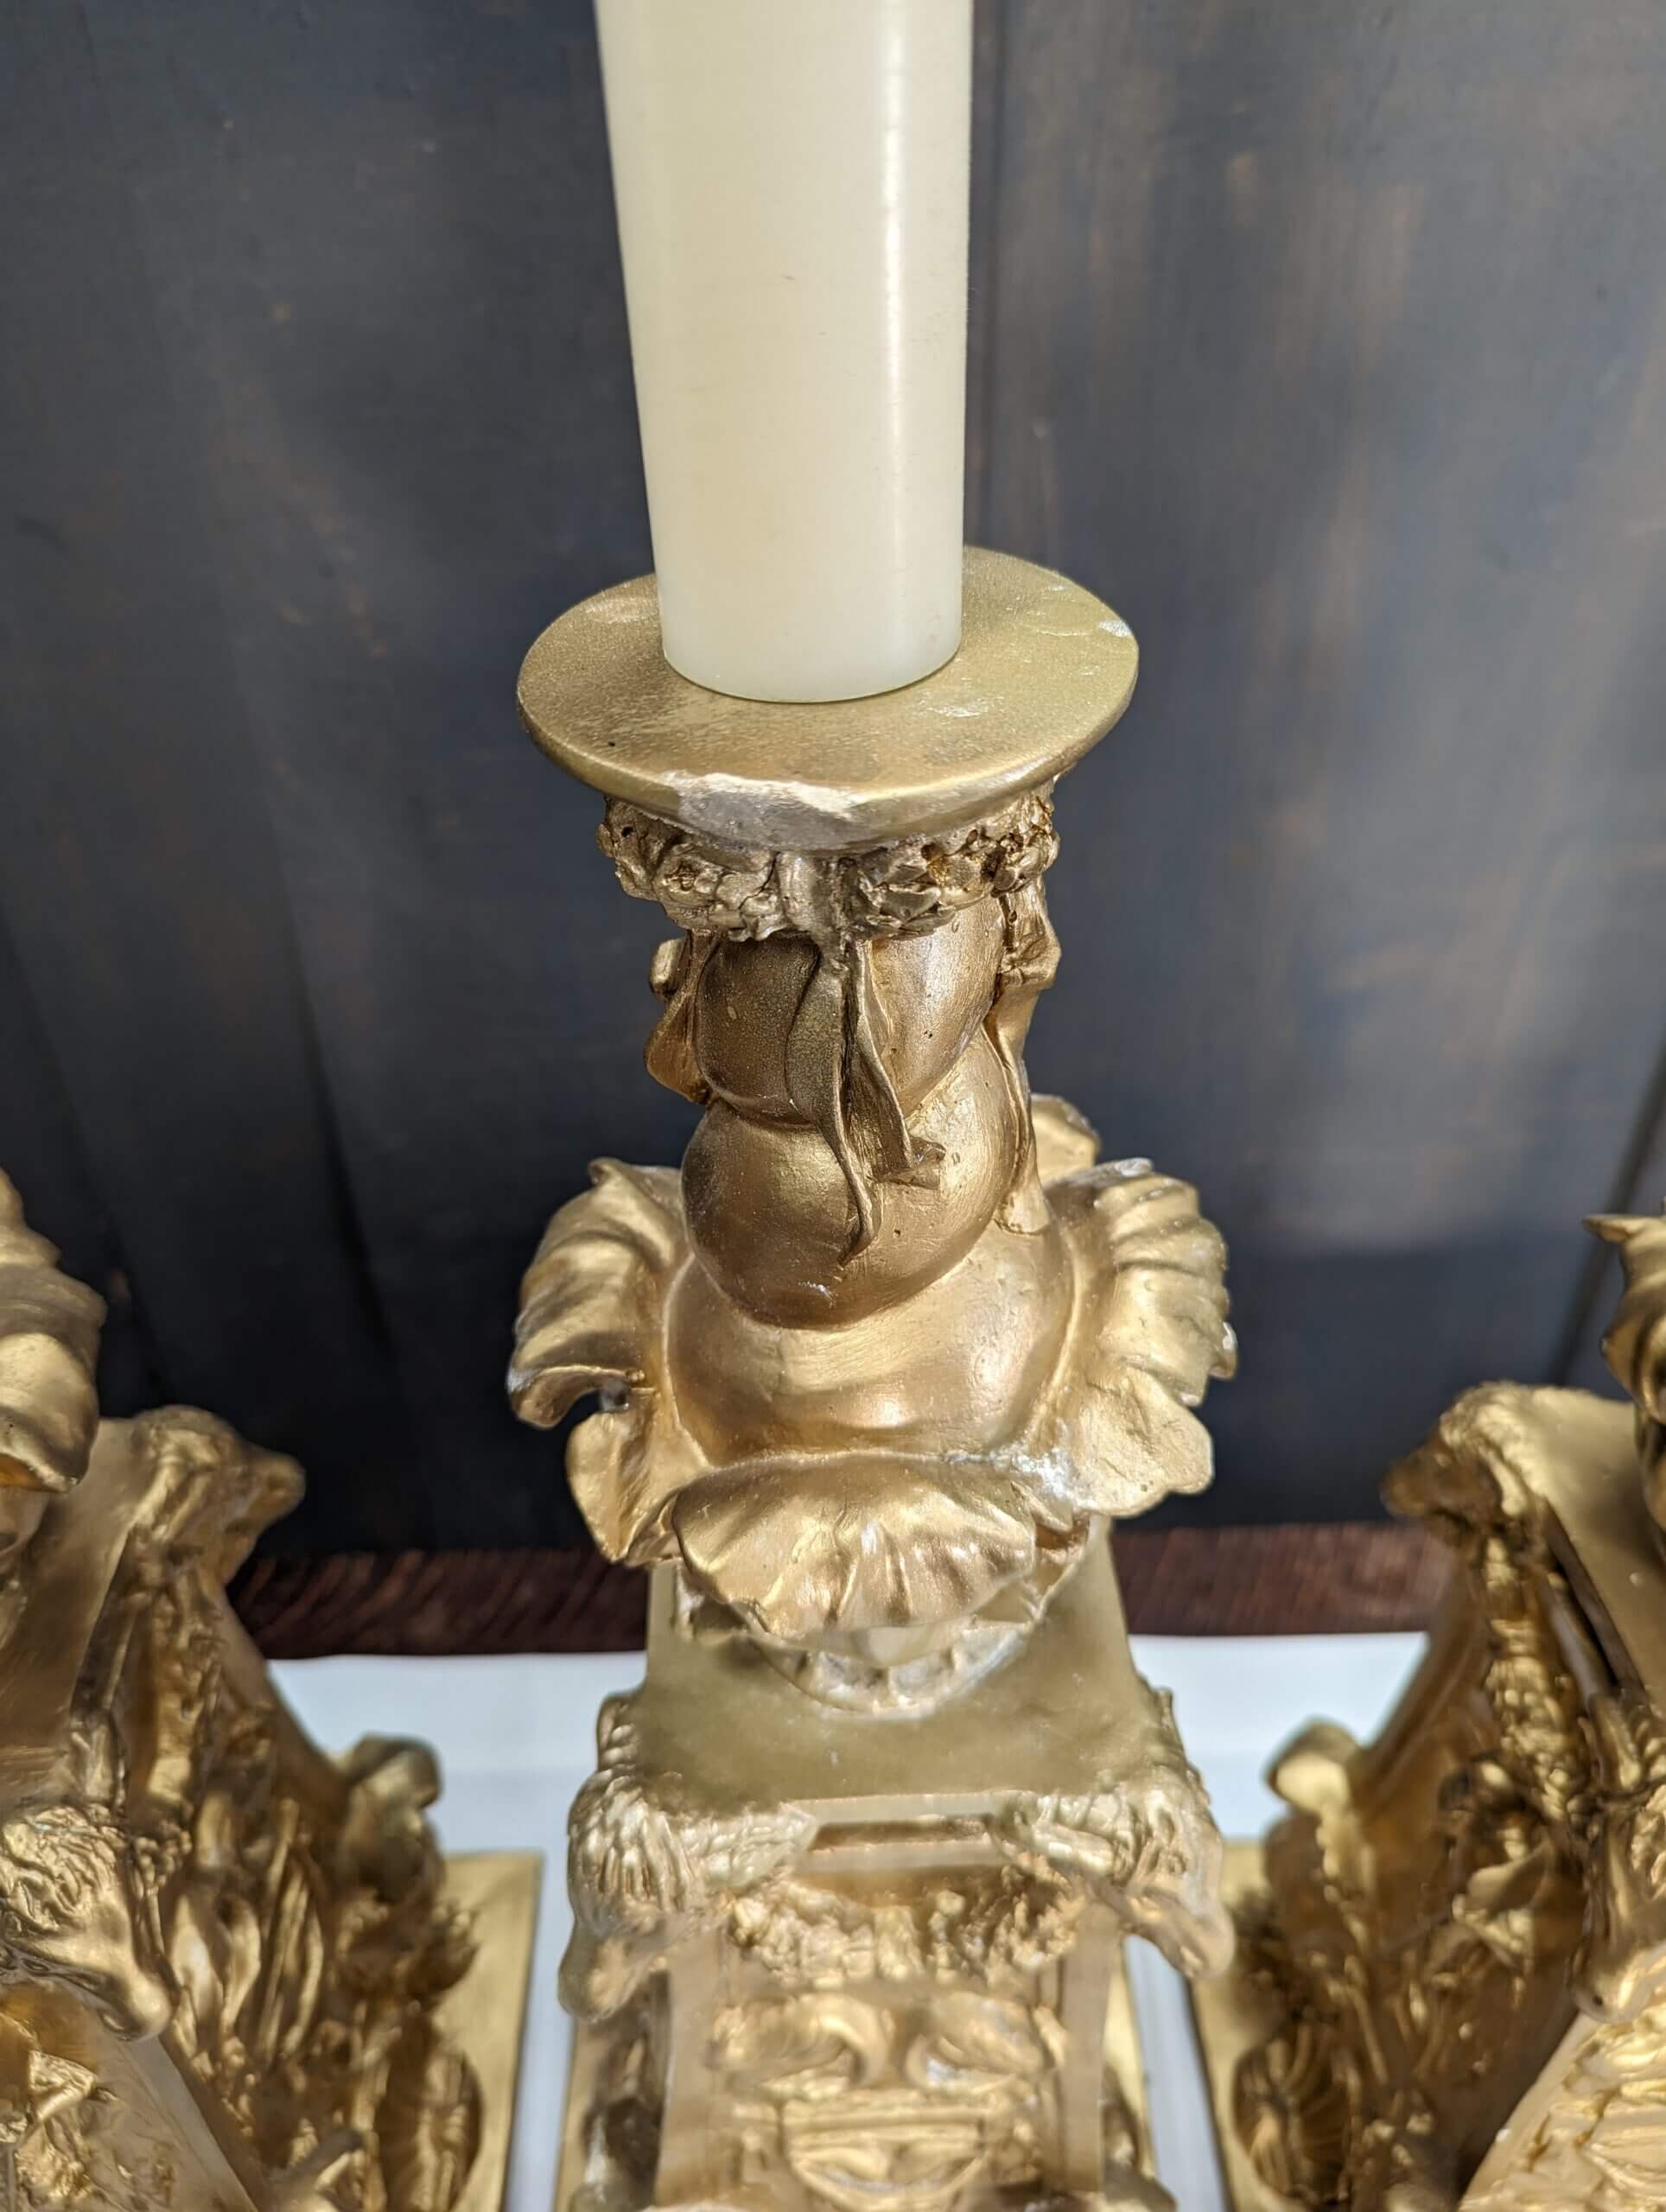 How to Make Plaster of Paris Pumpkin Candle Holders - Gilded Stork